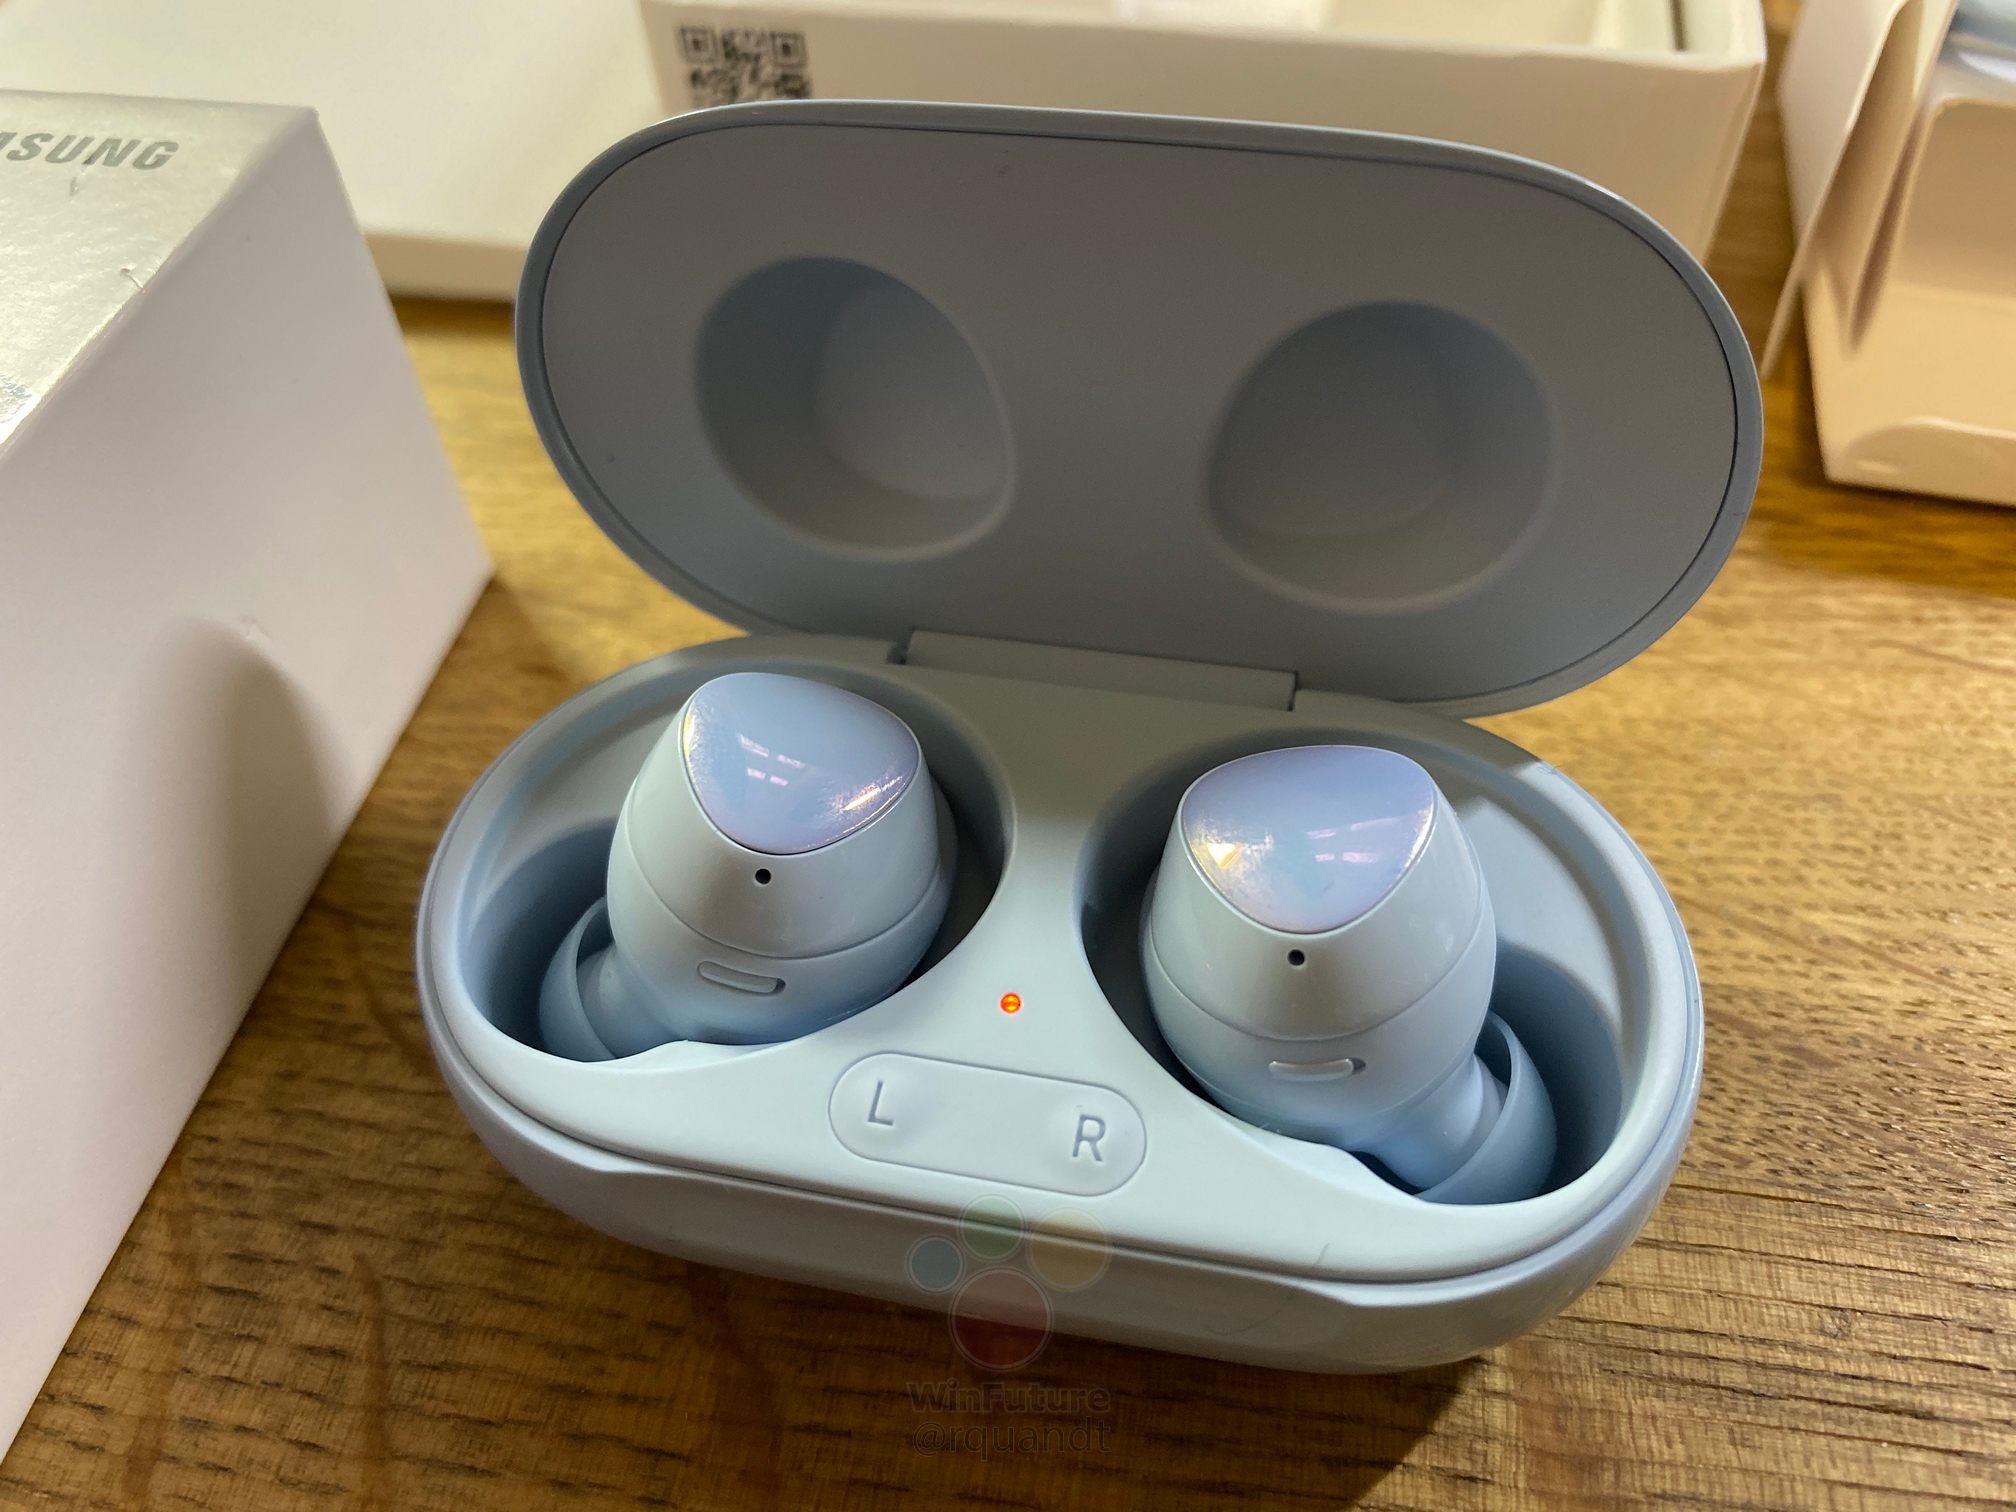 Samsung Galaxy Buds+ gets hands-on review before launch - Android Community